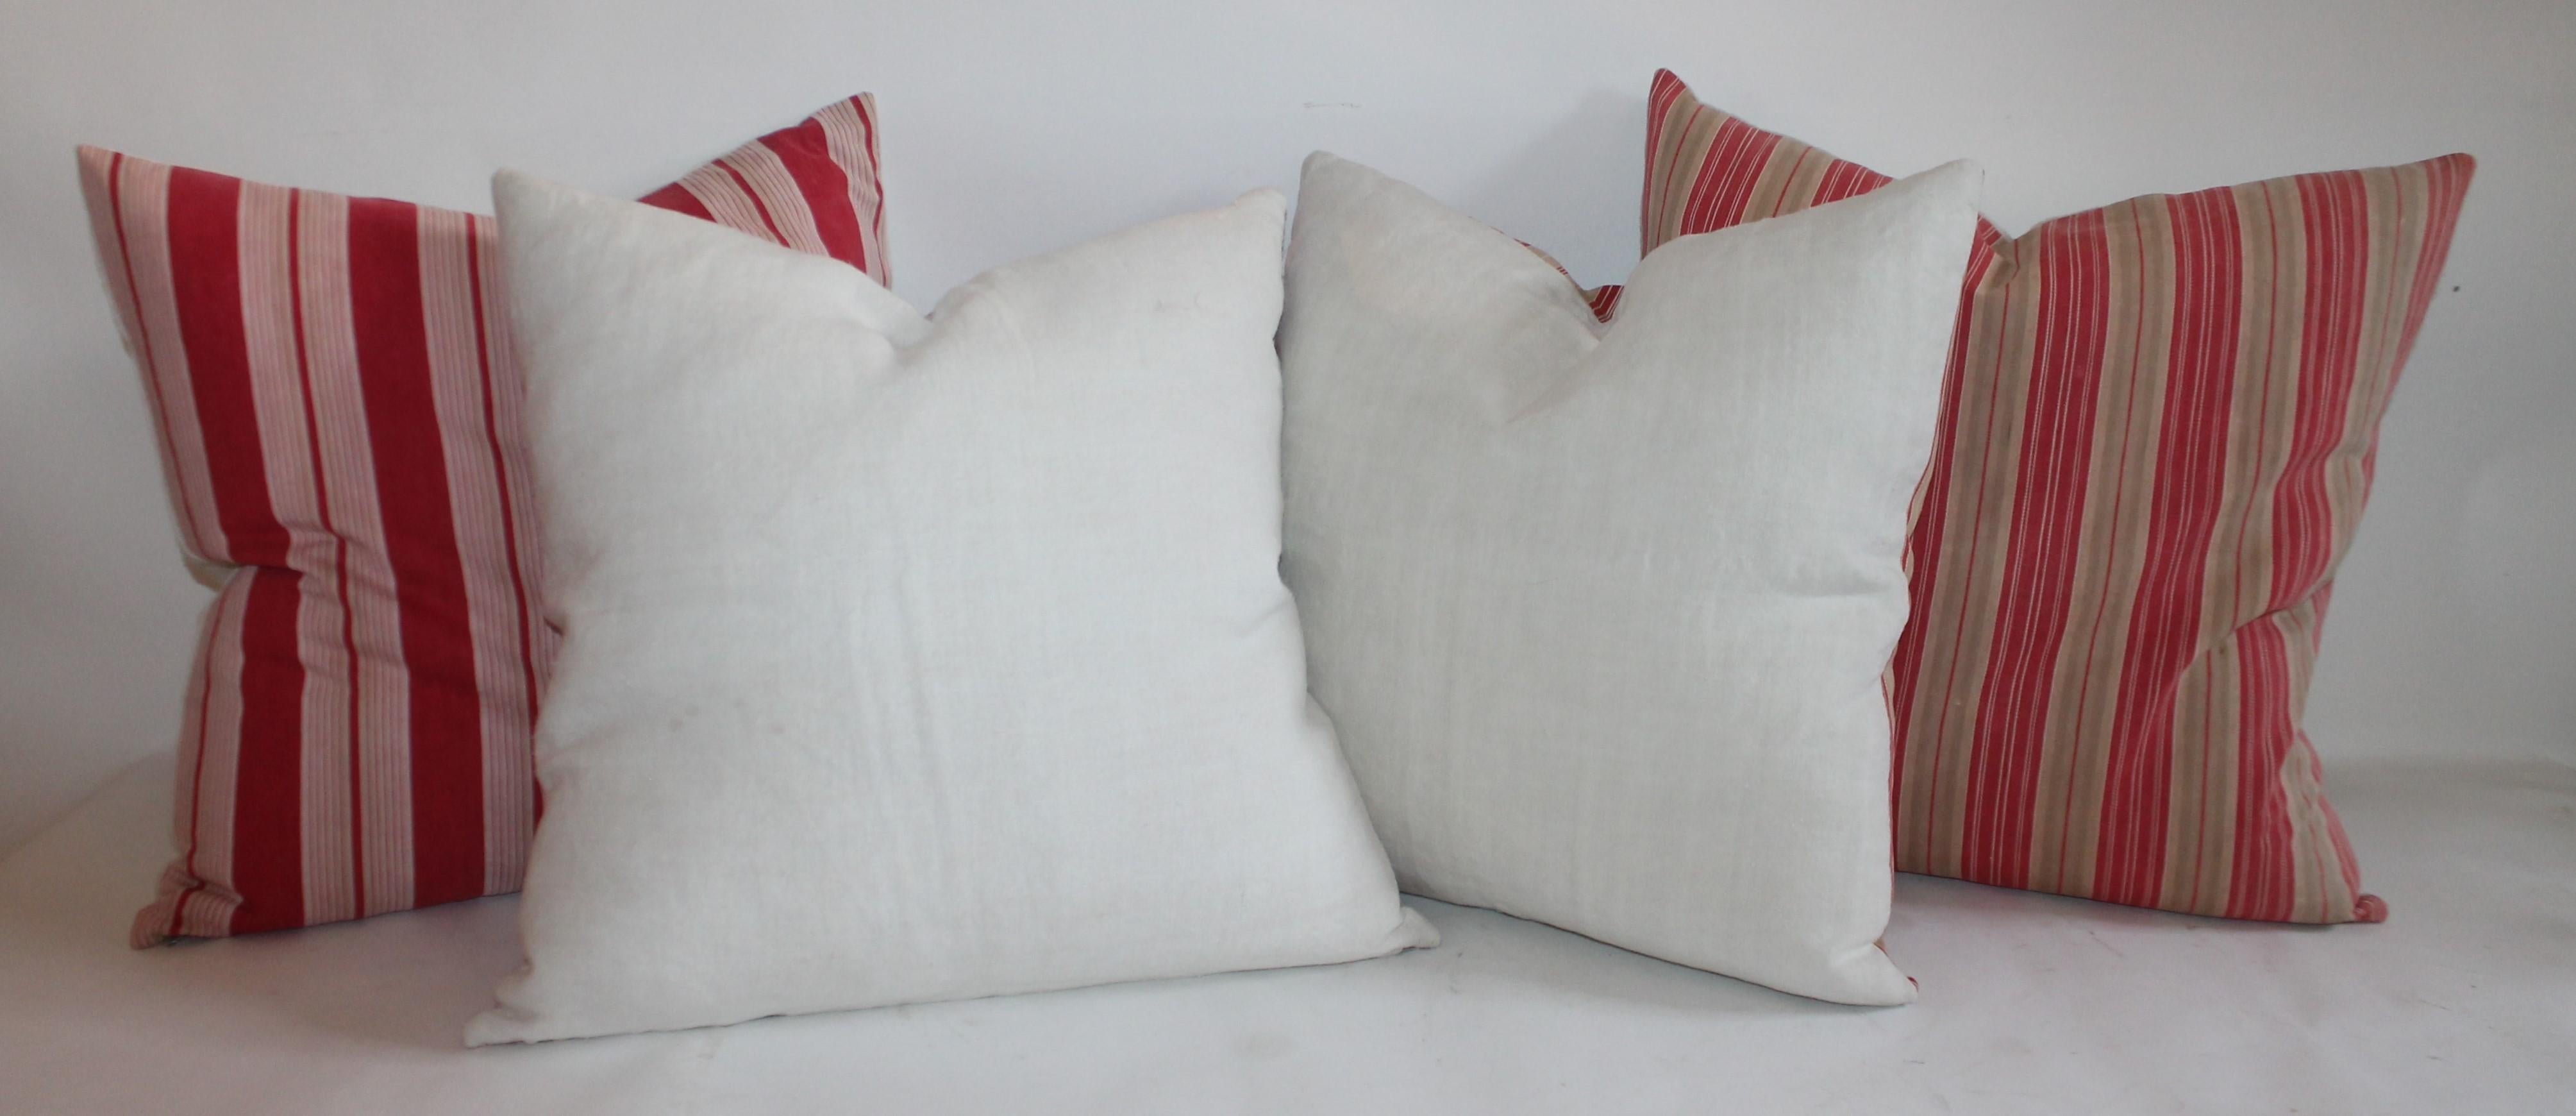 Largest pillows are 22 x 22 small and medium pillows are 20 x 20 and 19 x 19. 
Ask about multiples.